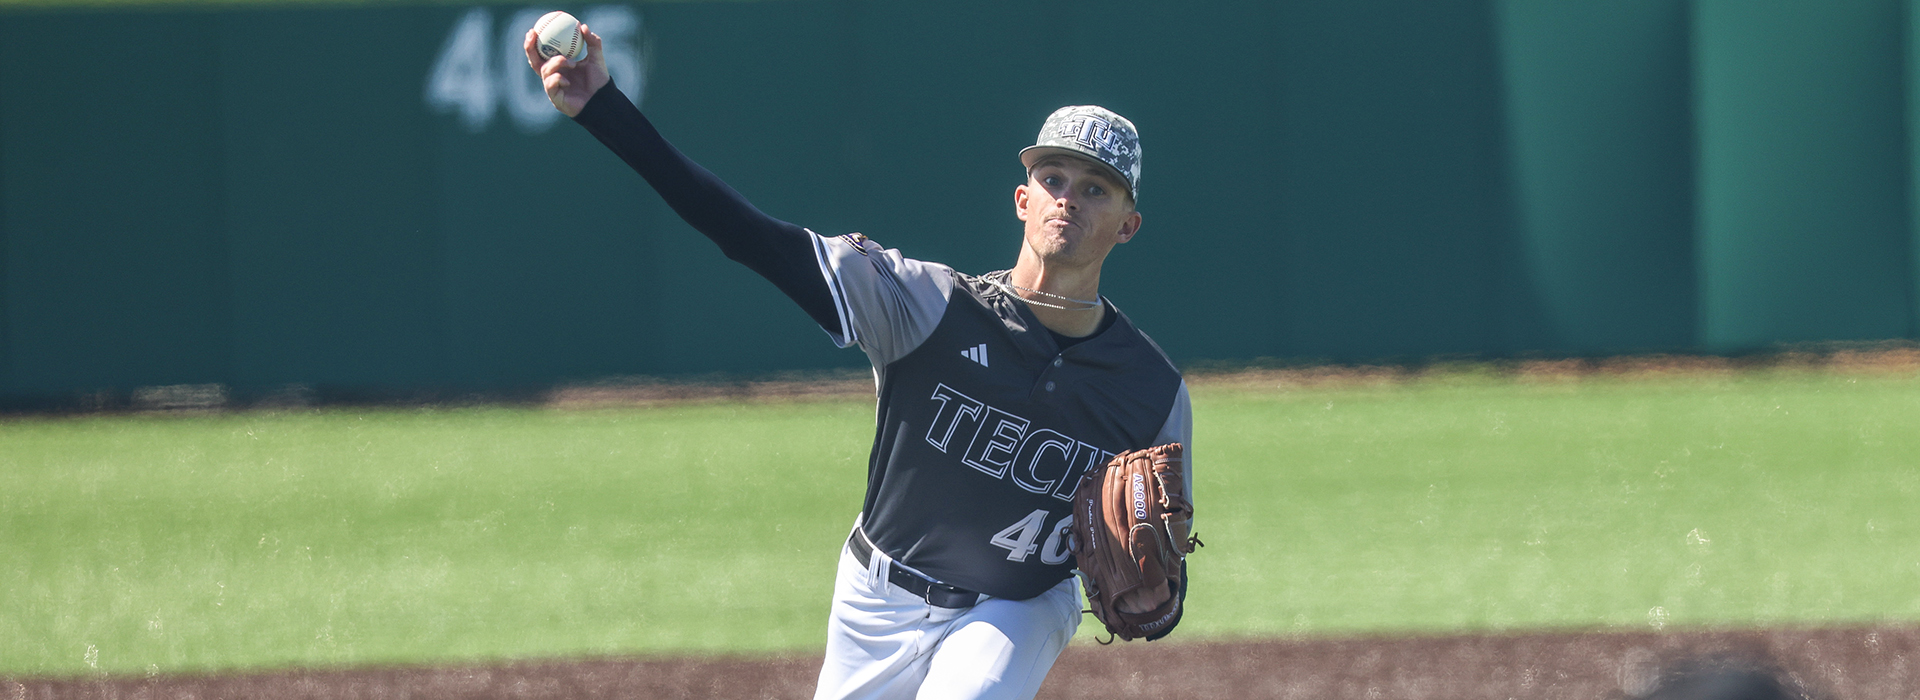 Pease earns first career OVC Pitcher of the Week honor, fourth straight for Tech pitching staff